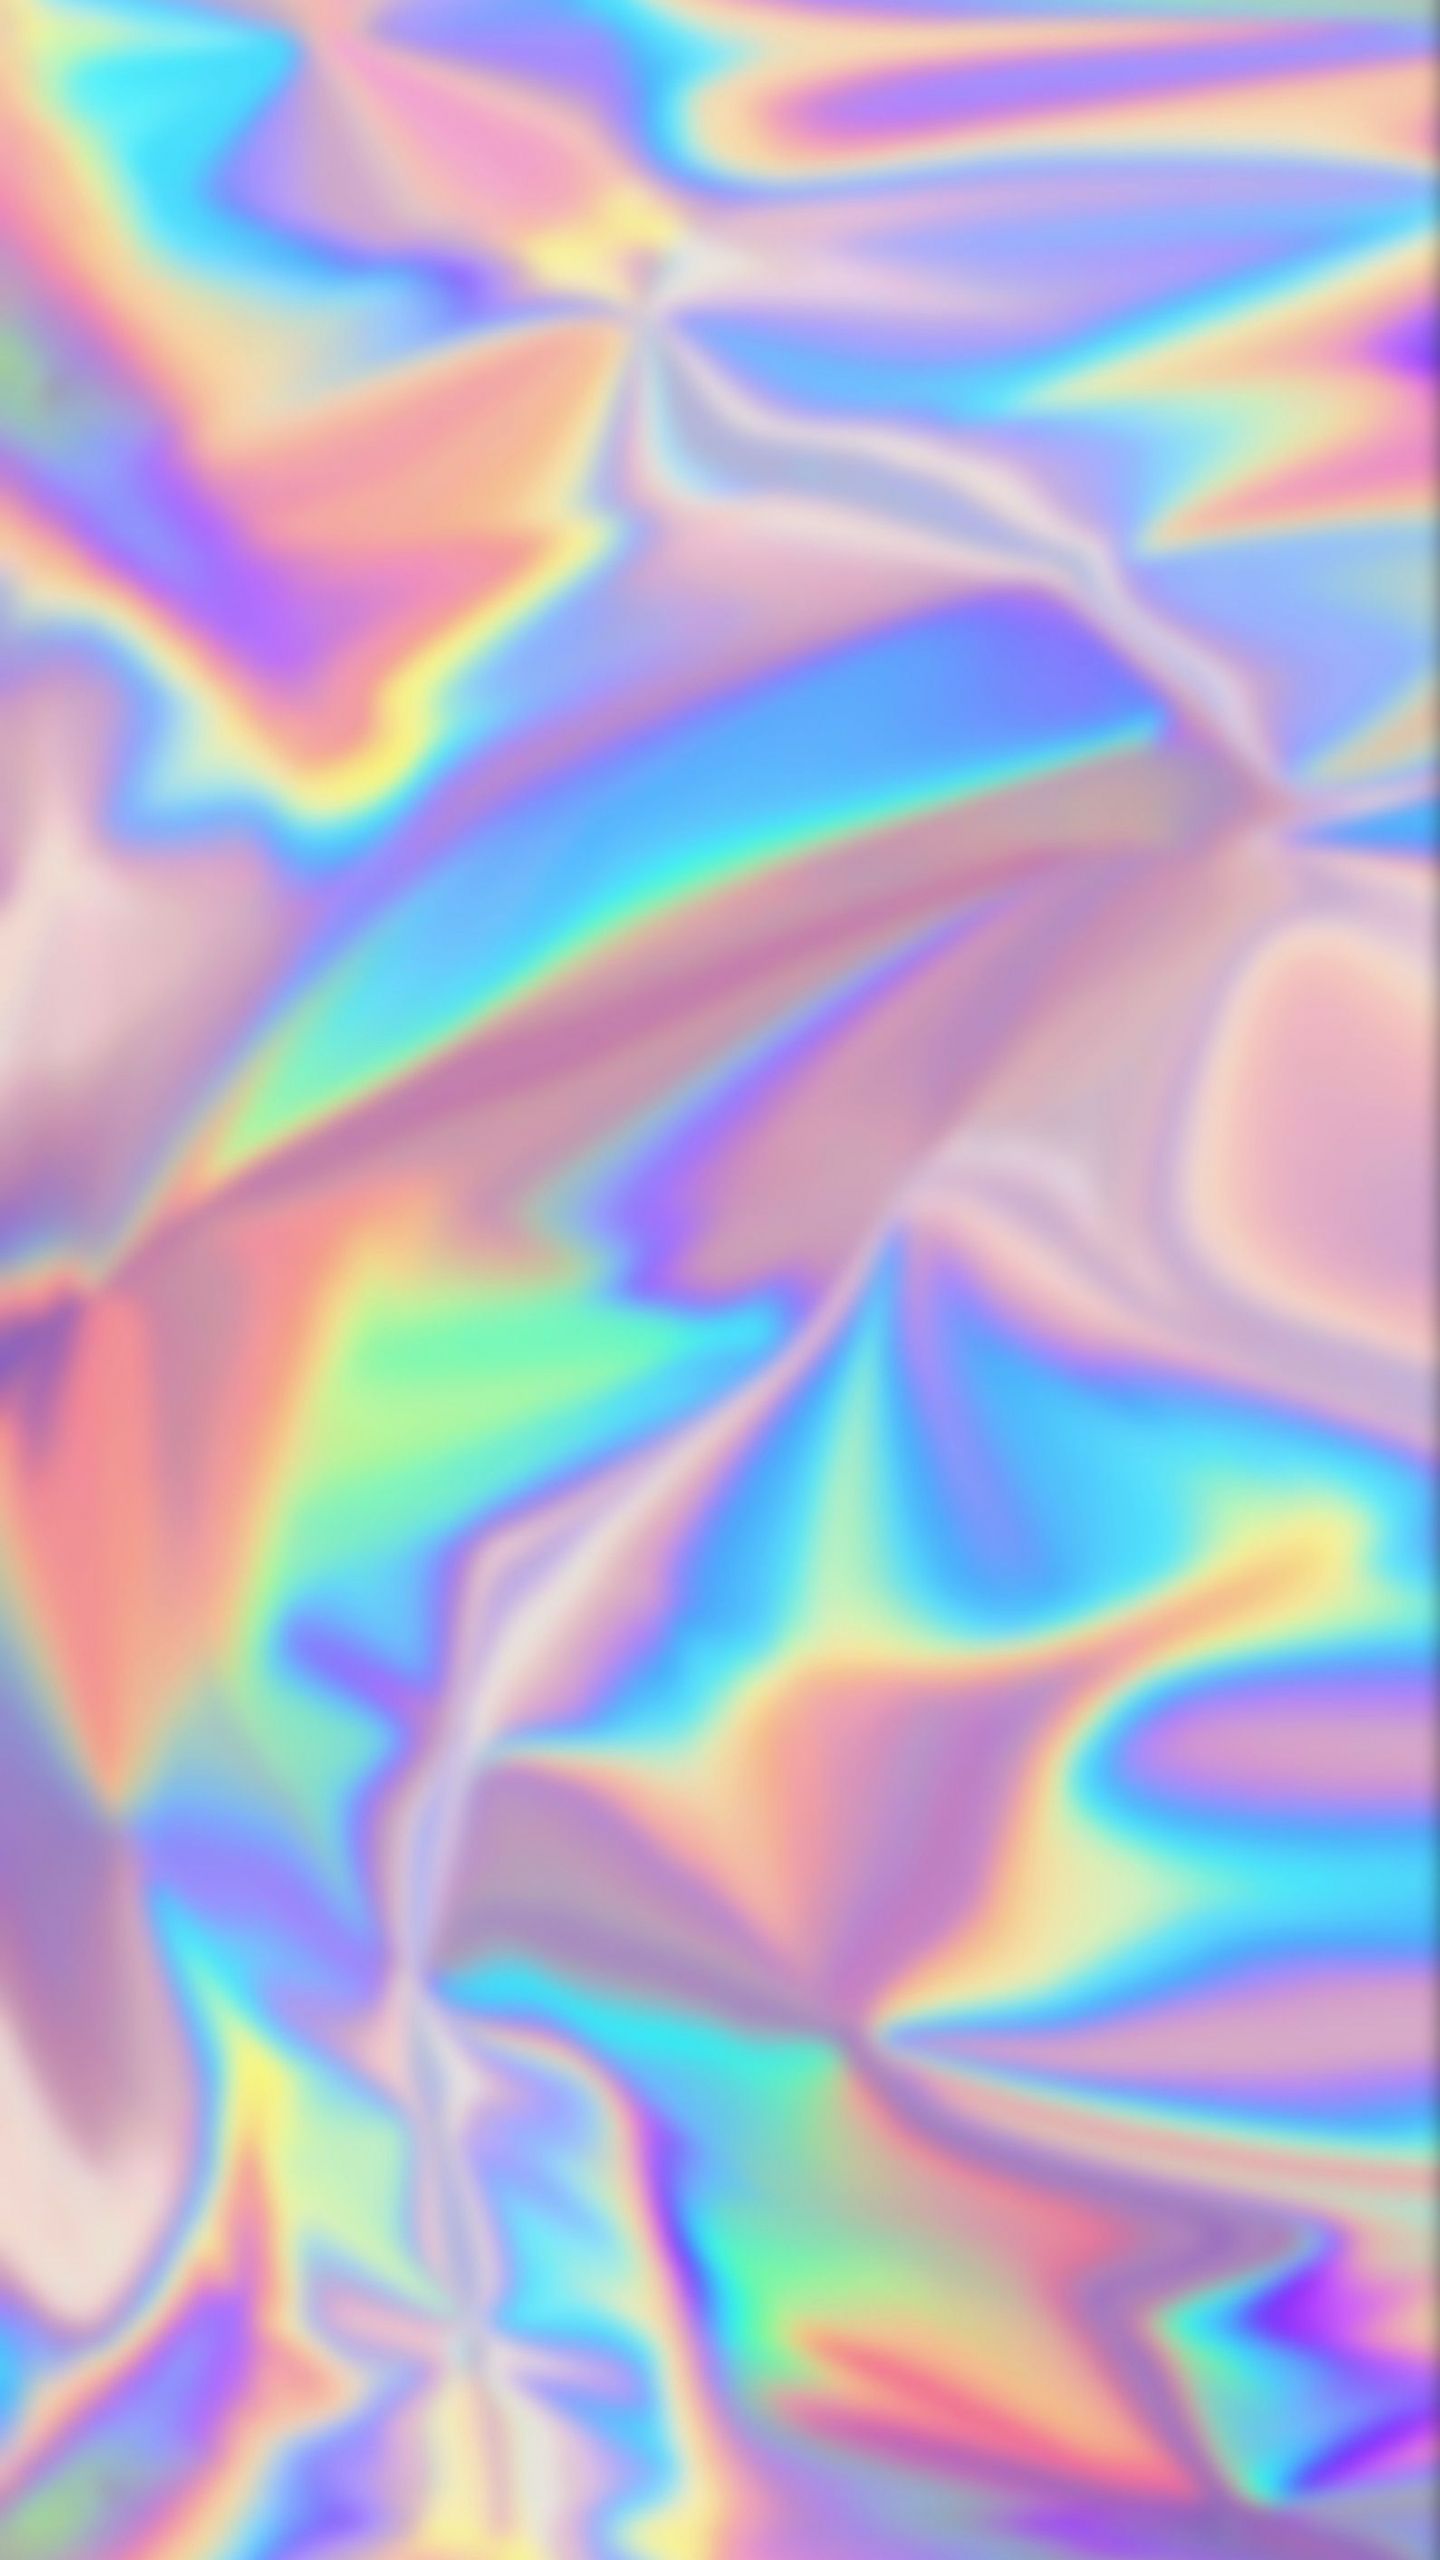 A colorful abstract pattern on an iPhone - Colorful, holographic